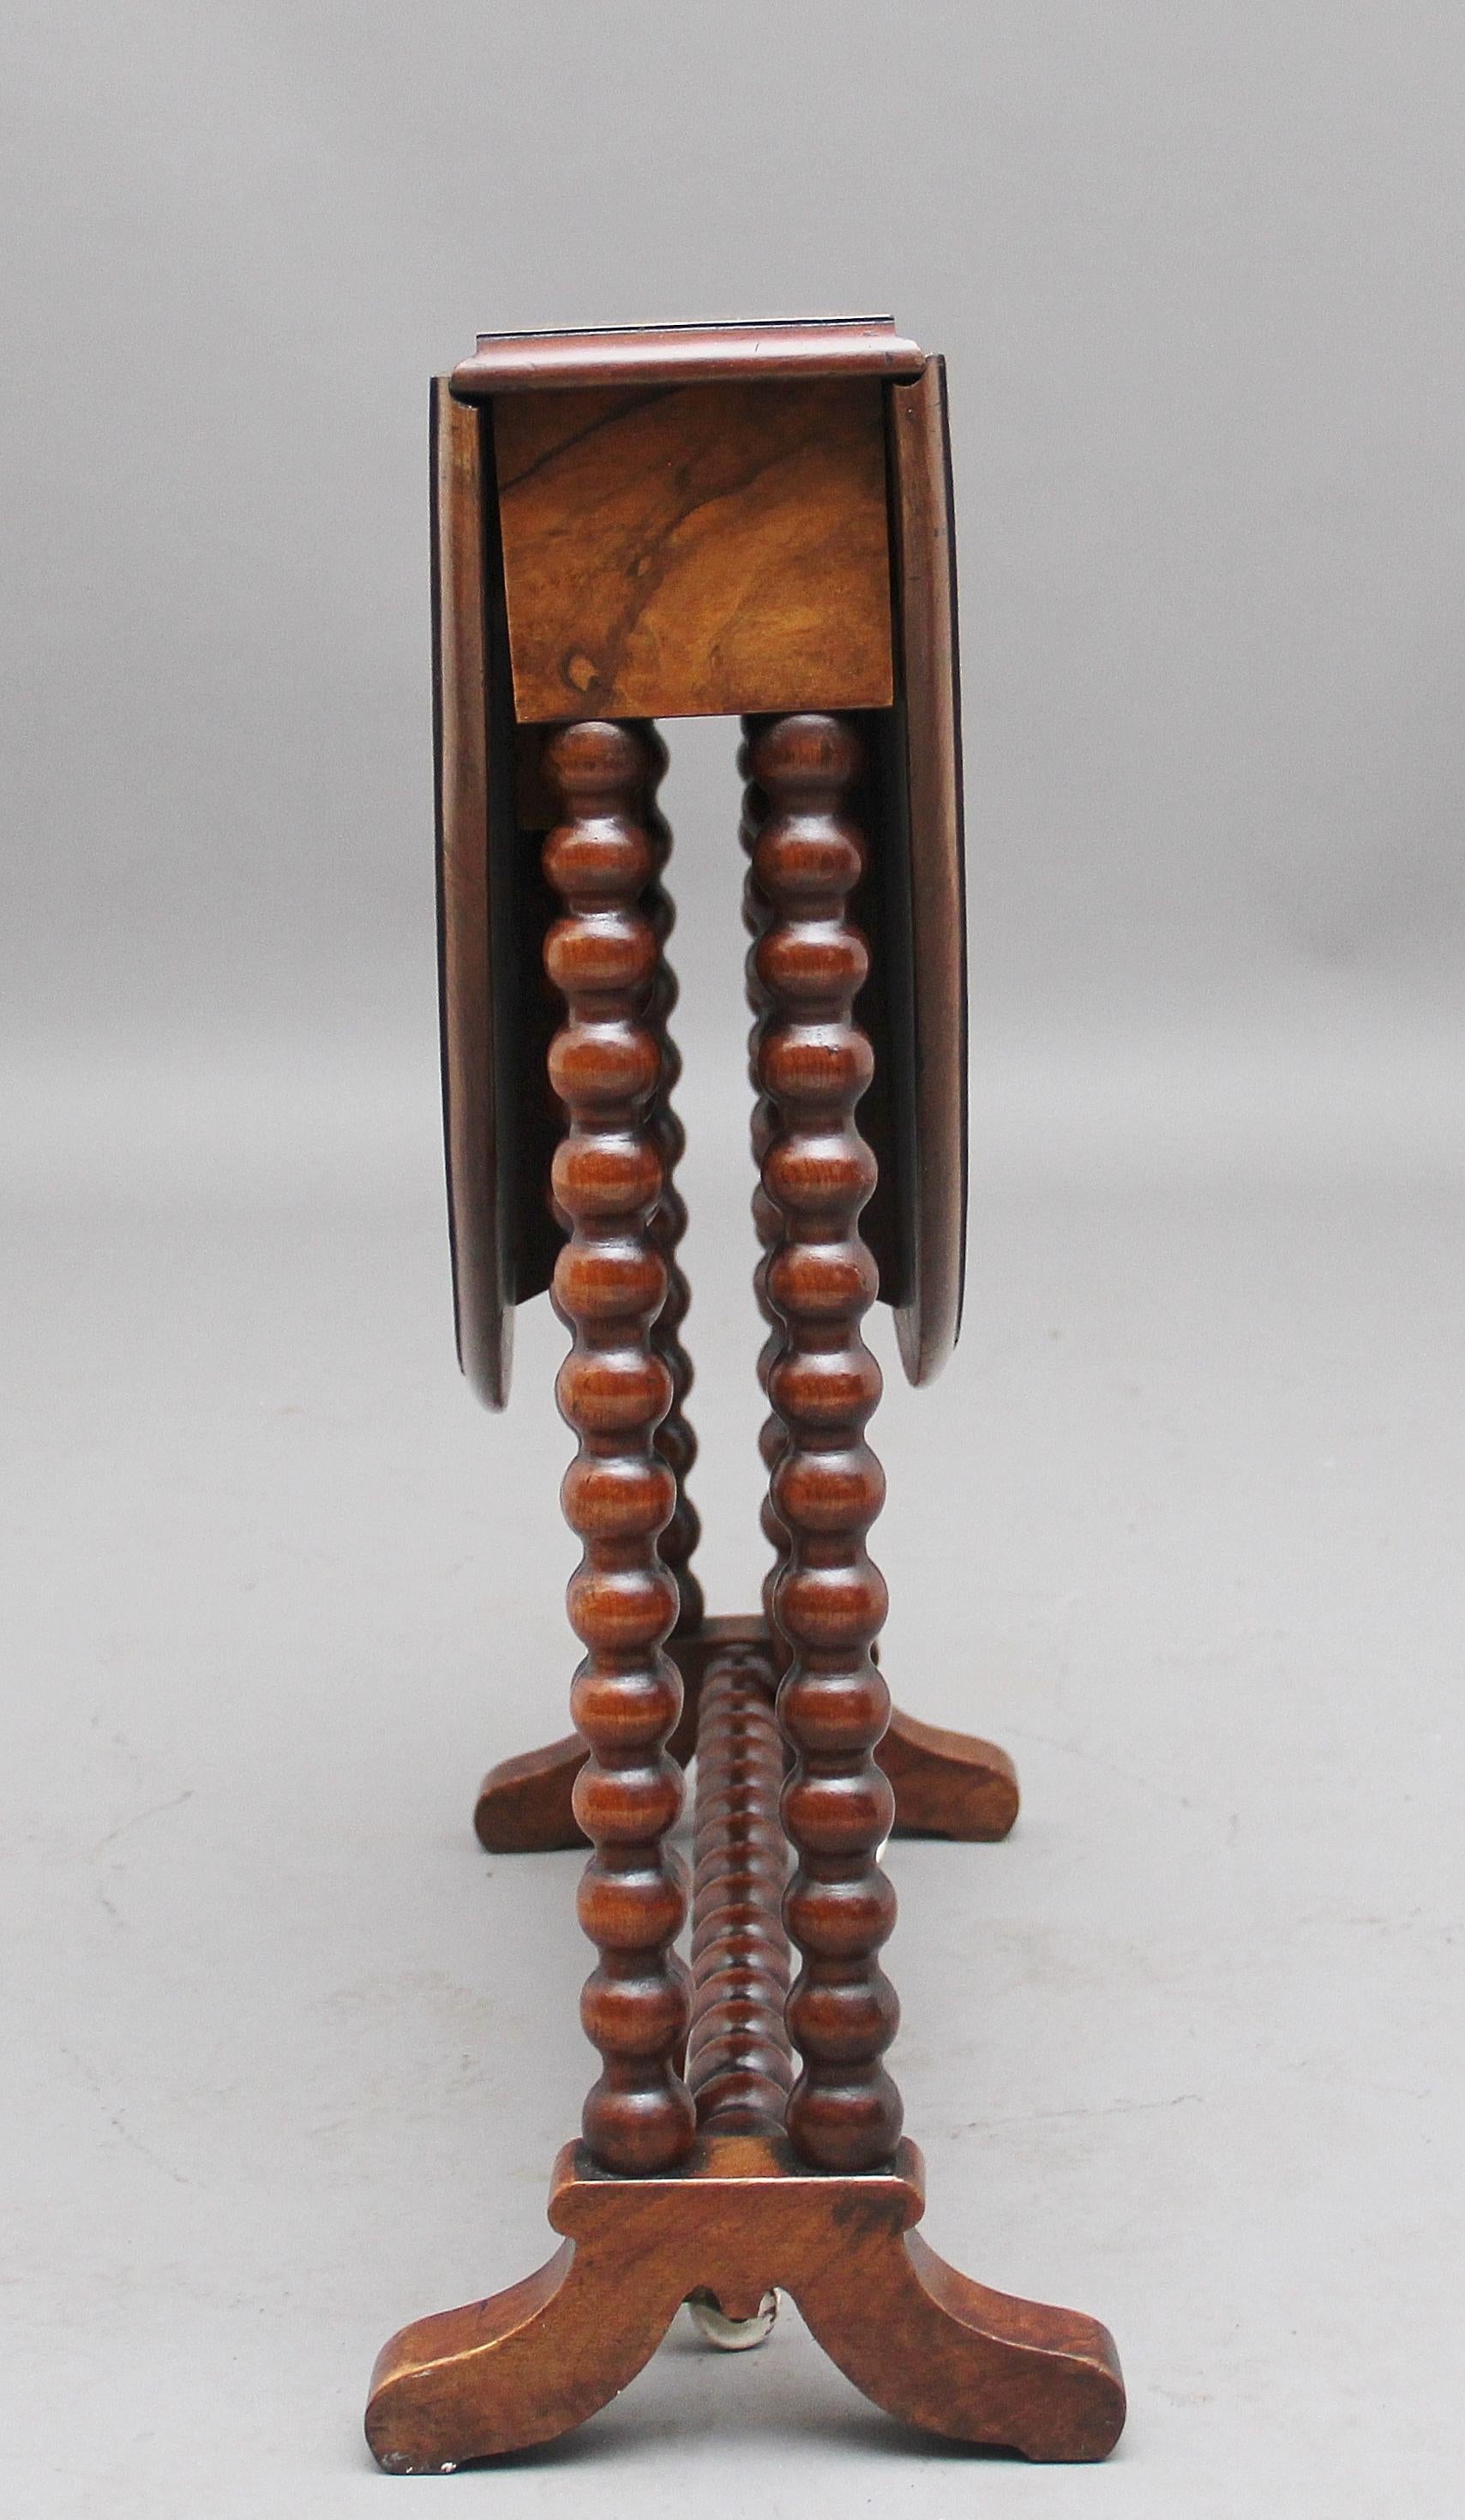 19th century burr walnut Sutherland table of small proportions, the oval quarter veneered top with a moulded edge raised on bobbin turned supports, standing on shaped feet. The table is in very good condition and has a lovely burr walnut figured